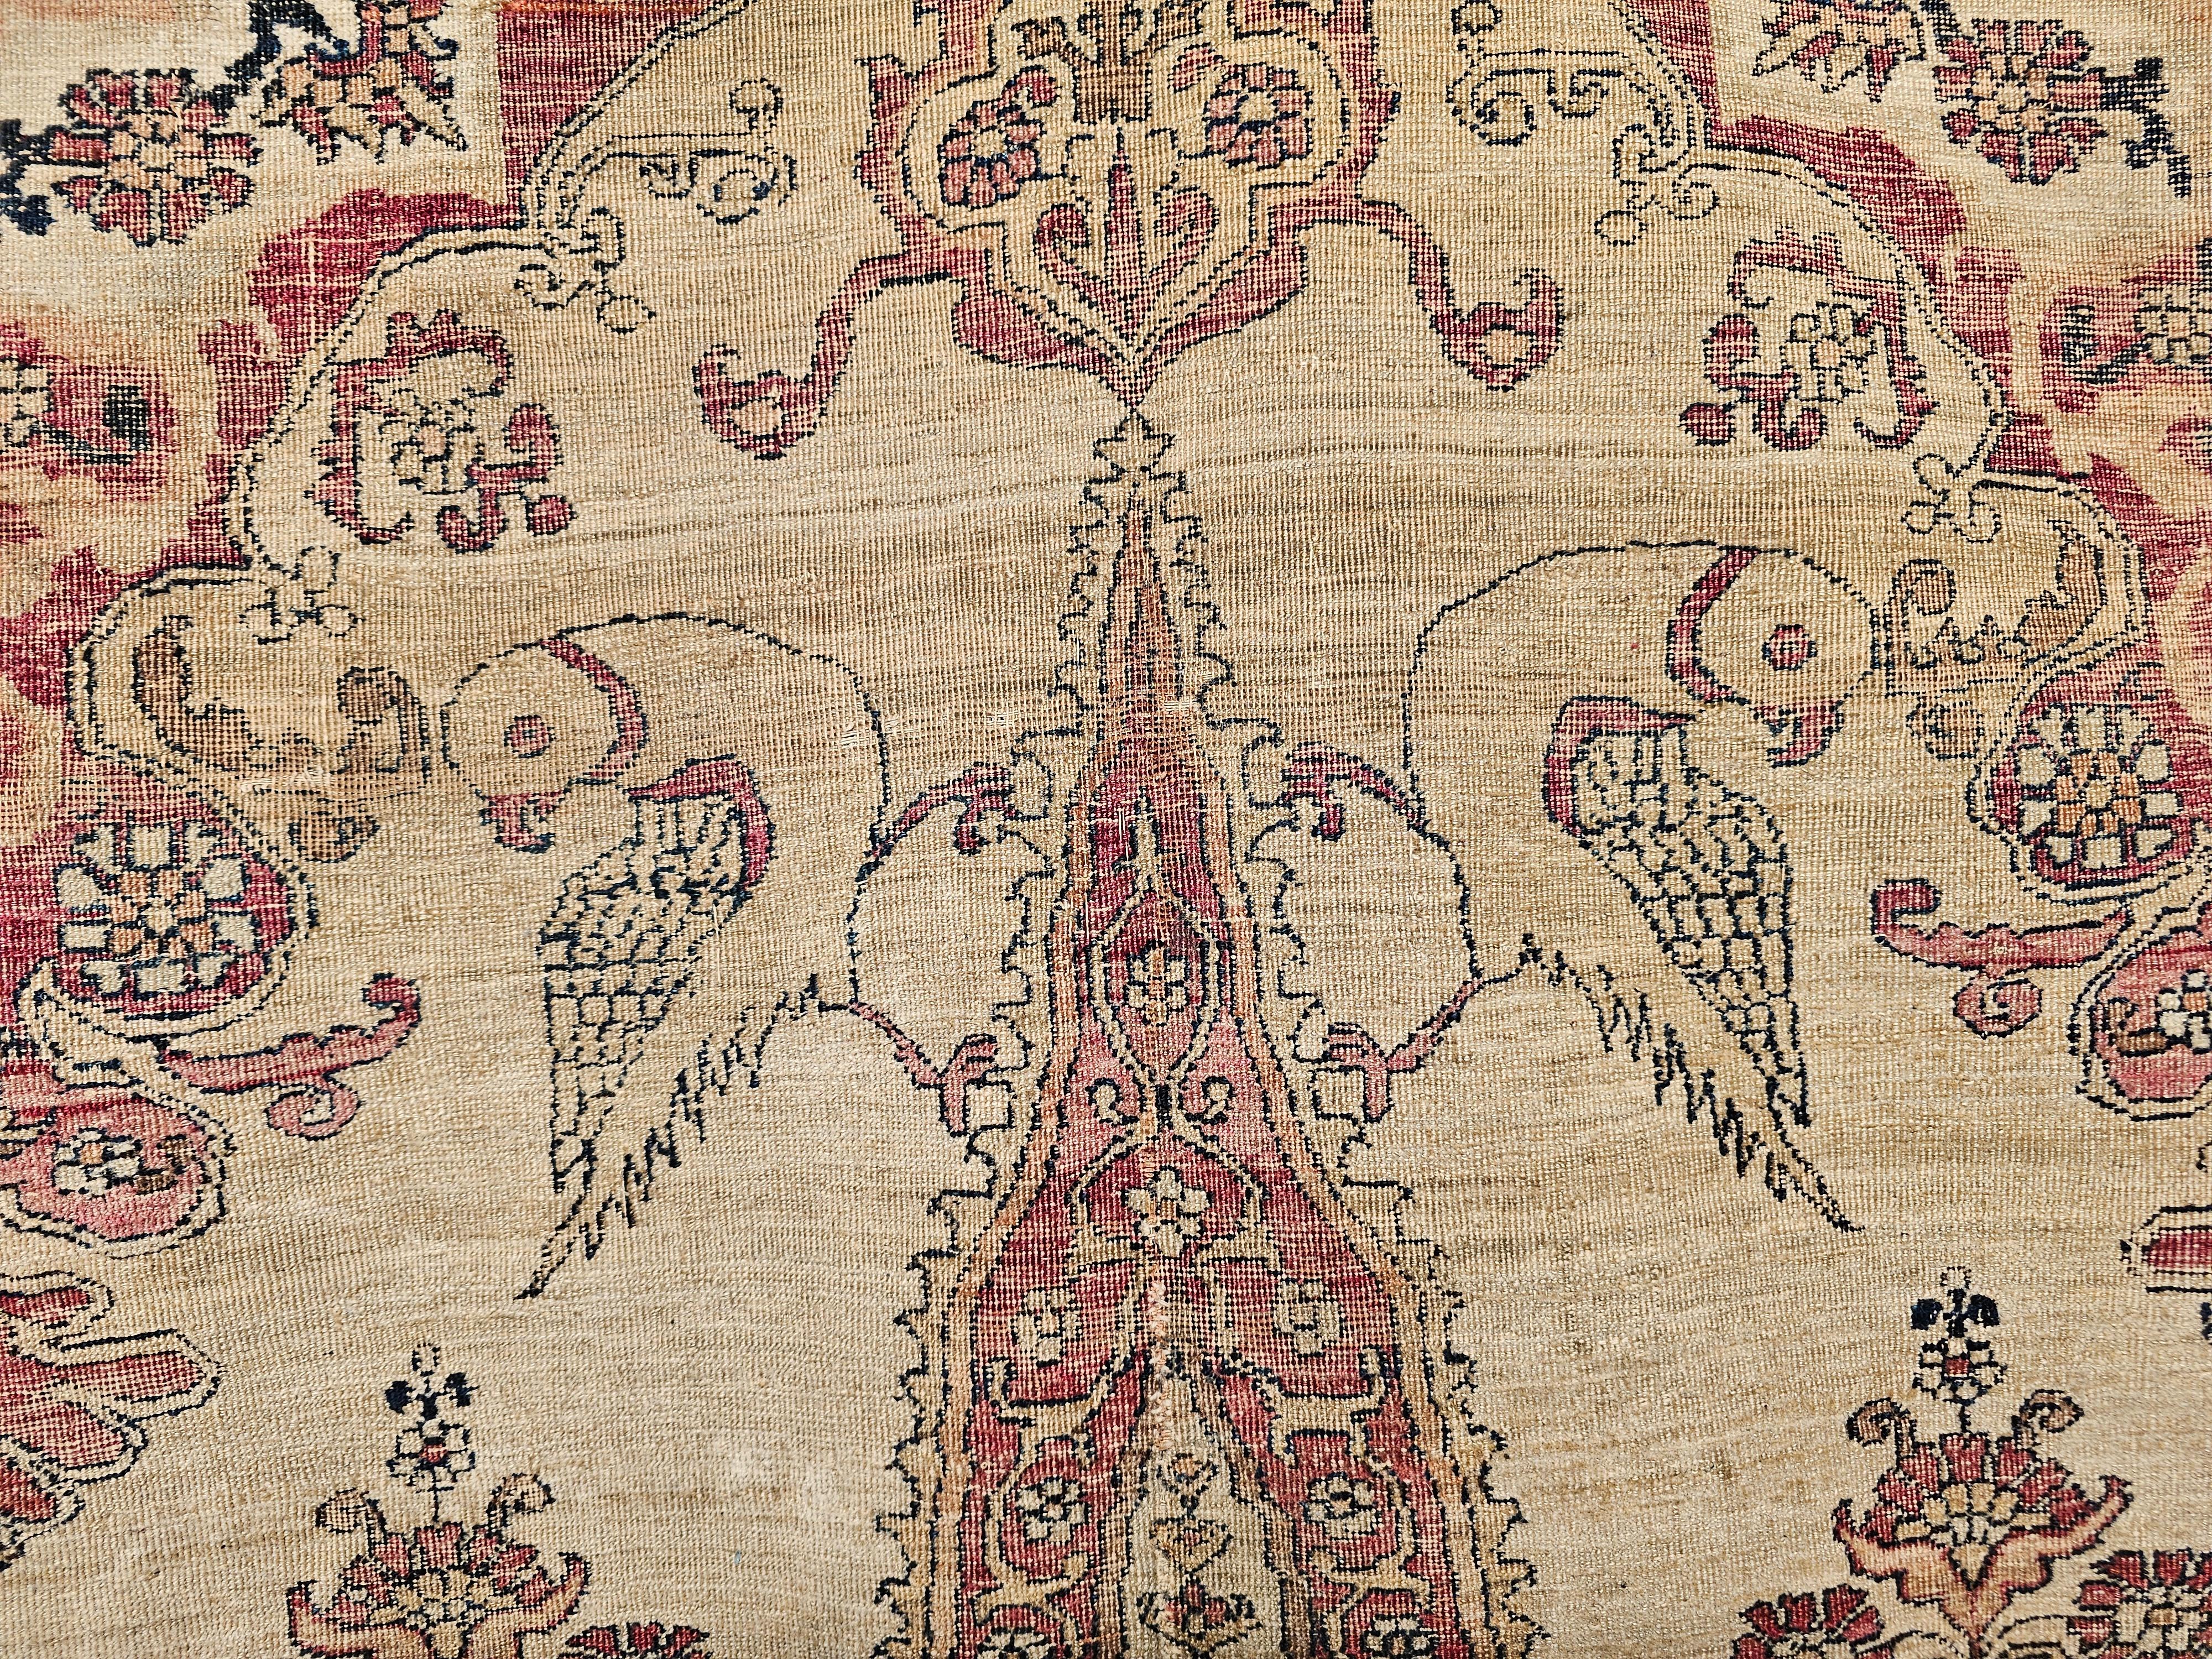 19th Century Persian Kerman Lavar Pictorial “Tree of Life” Rug in Camel, Red For Sale 3